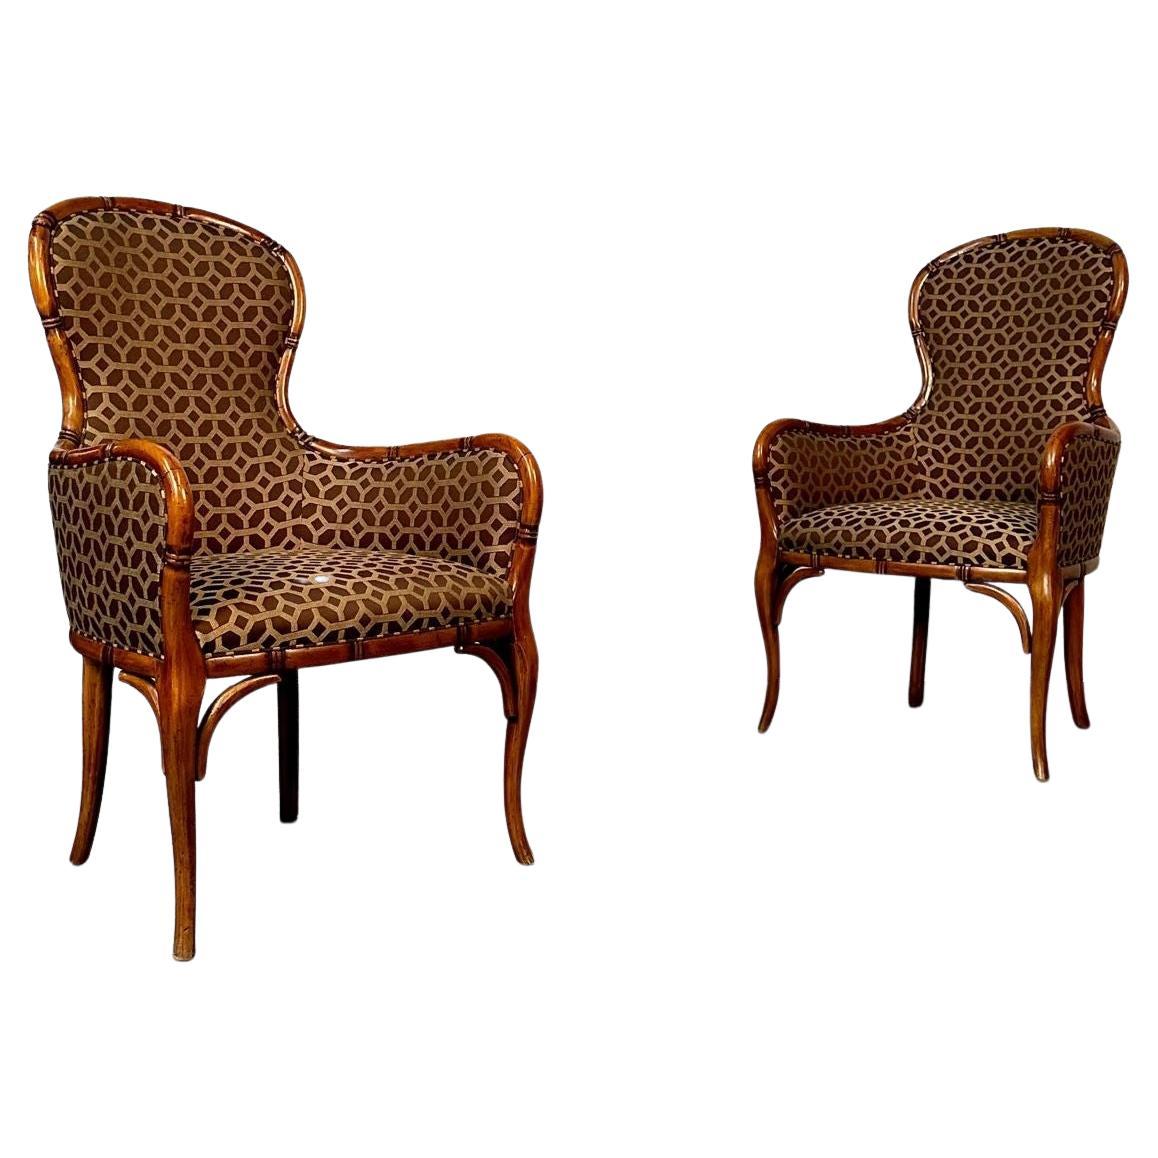 Pair of Fruitwood French Bamboo Carved Arm / Club / Accent Chairs, Kravet Fabric For Sale